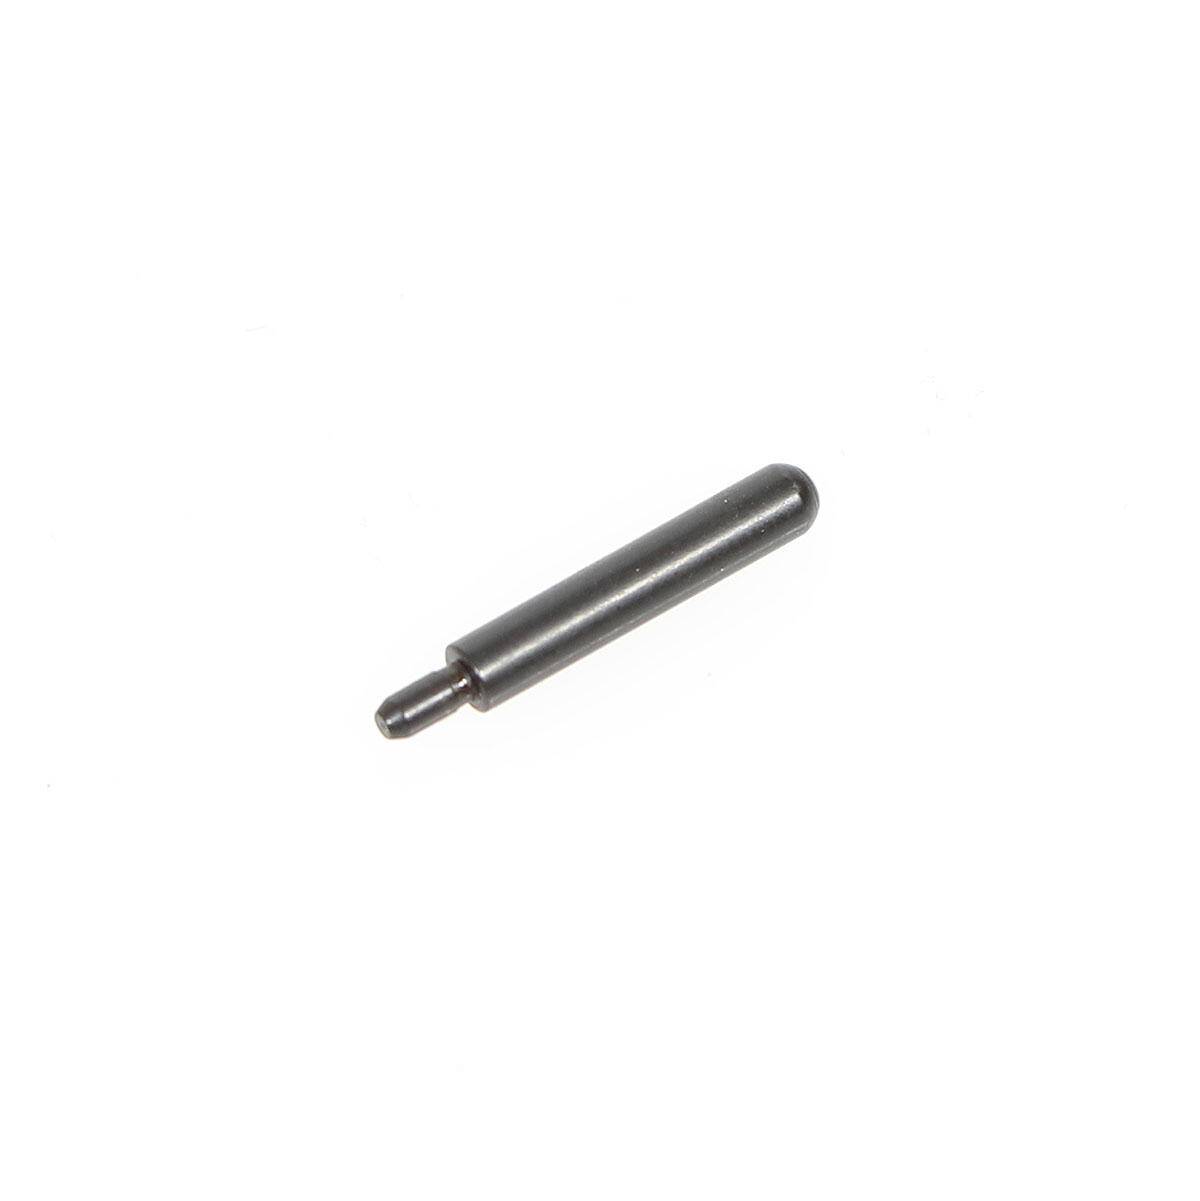 Bul Armory Safety Plunger Pin 1911/2011